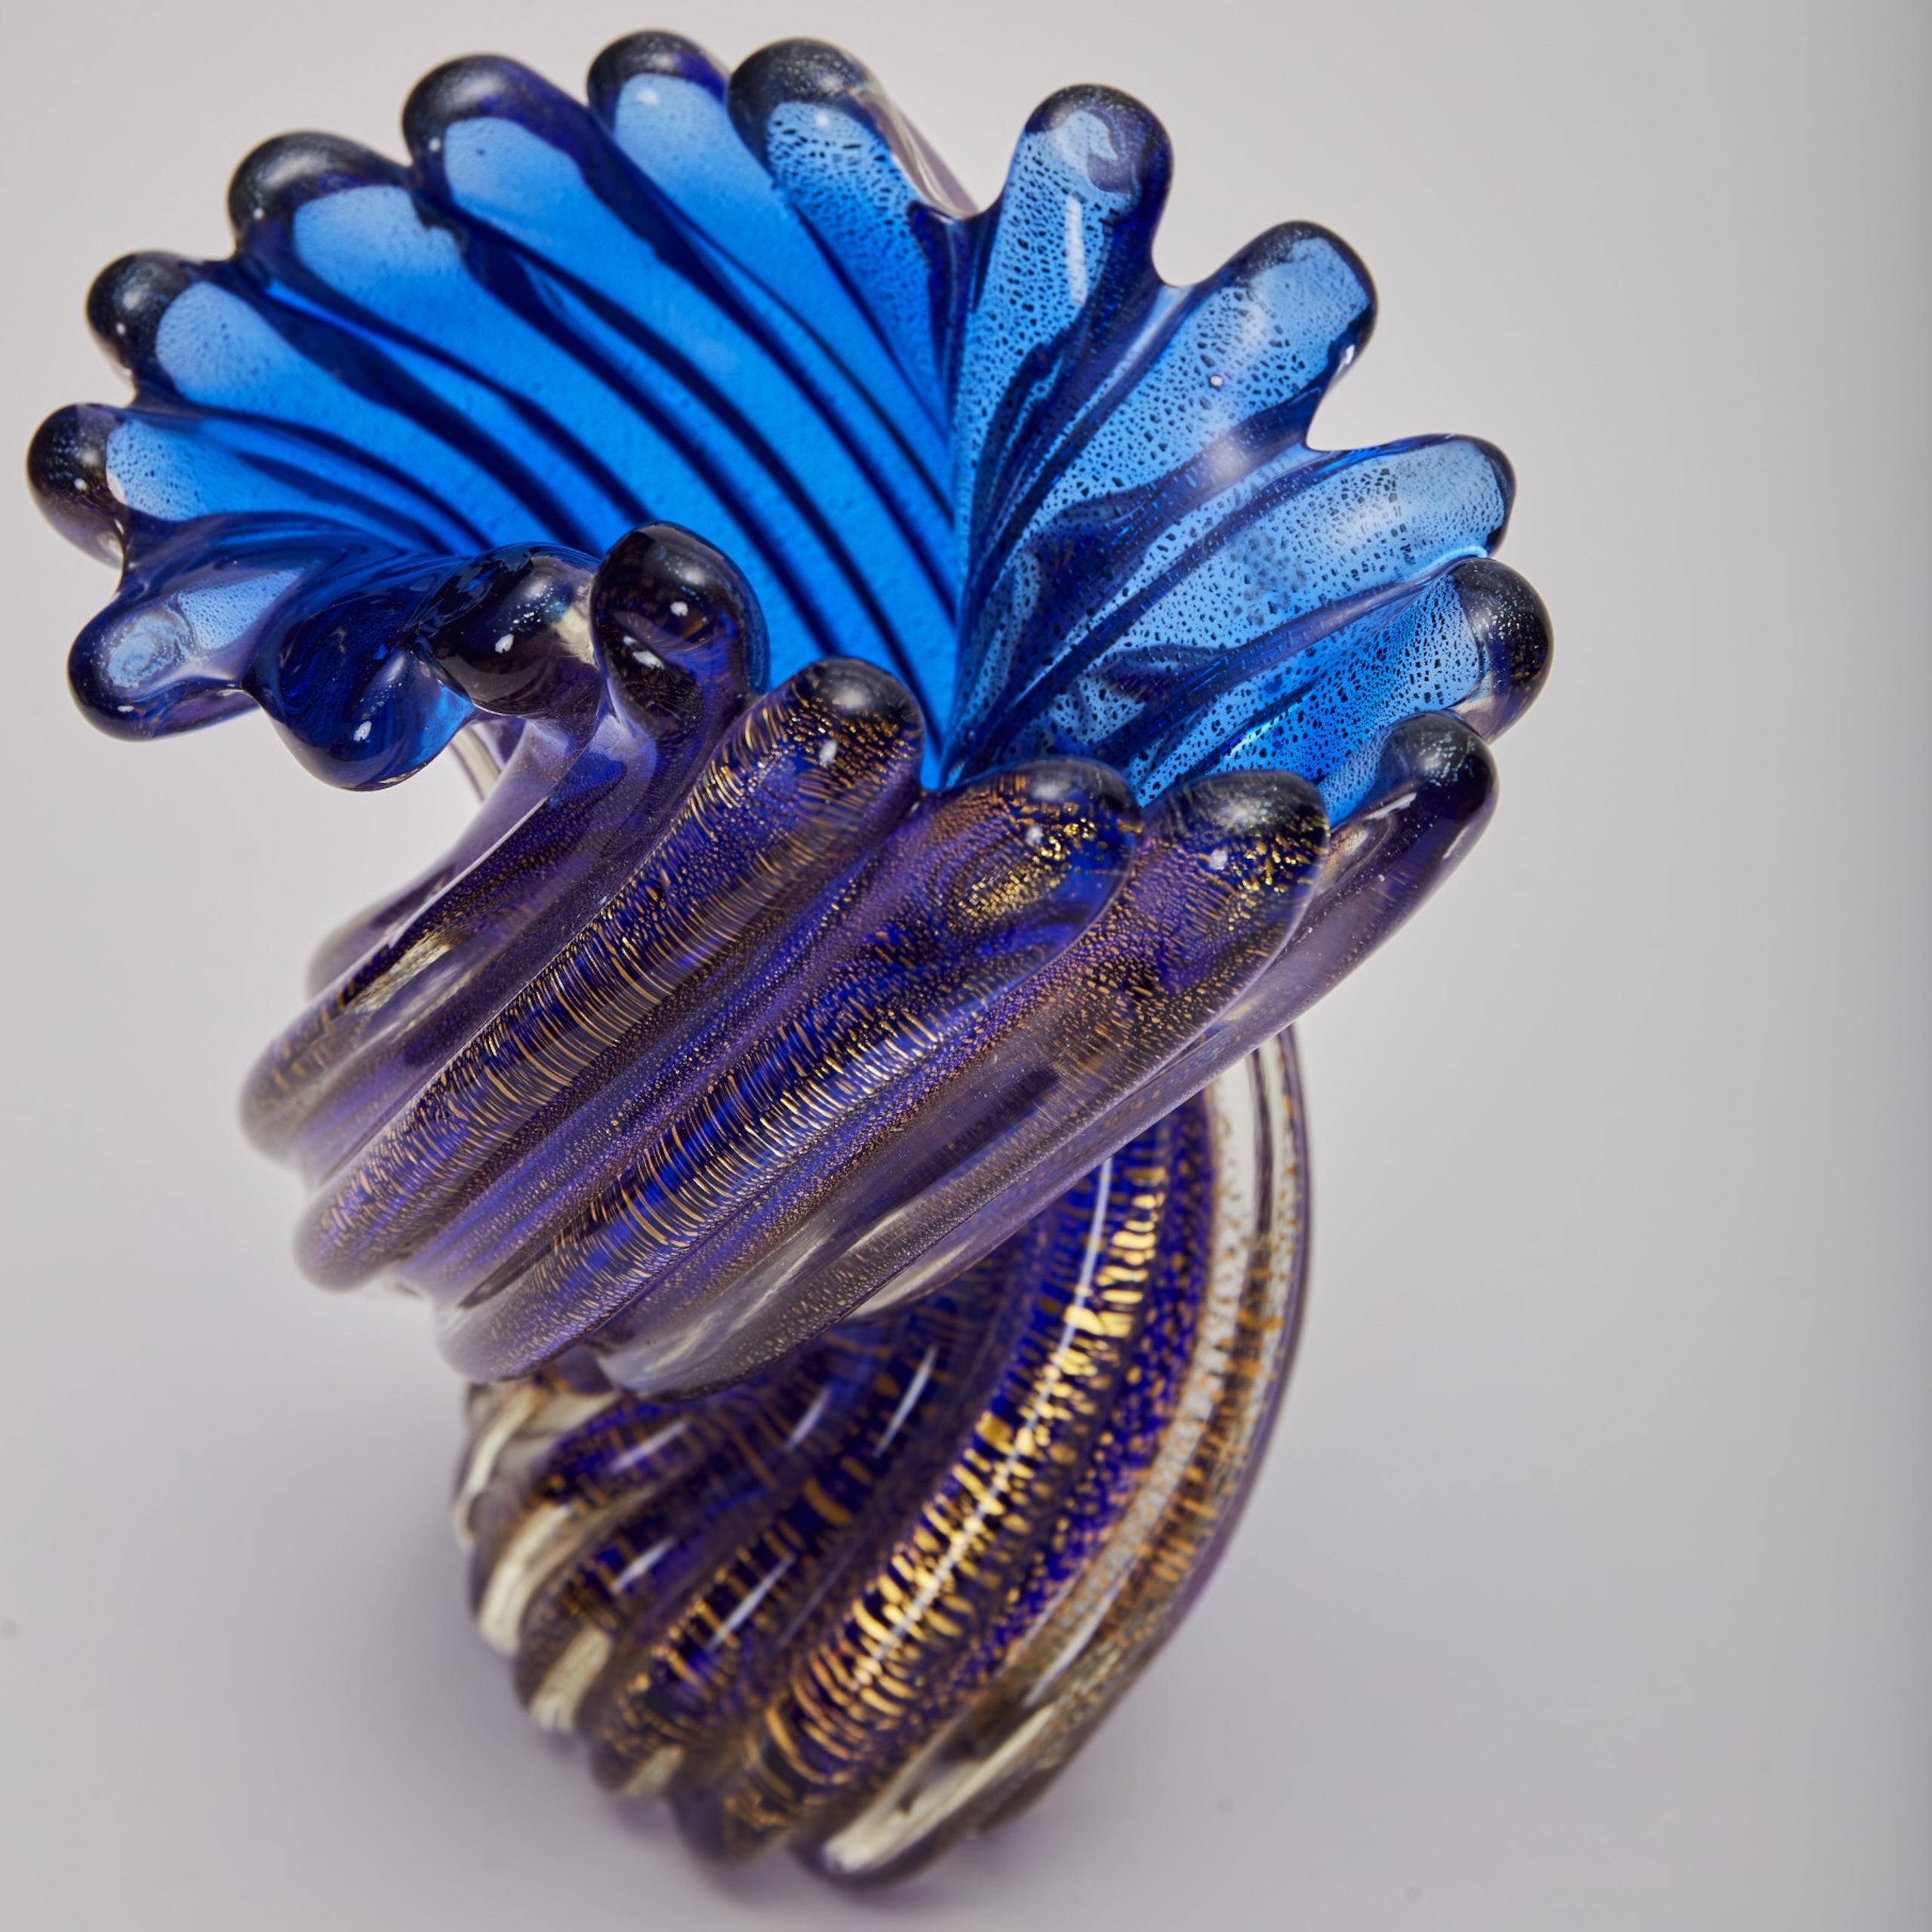 Ritorto means twined in Italian. This hand blown glass vase is made up of columns of translucent twisted glass to form a spiral shaped vase in Persian blue. The ribbed vessel is enhanced by a rainfall of gold leaf flecks throughout its body.